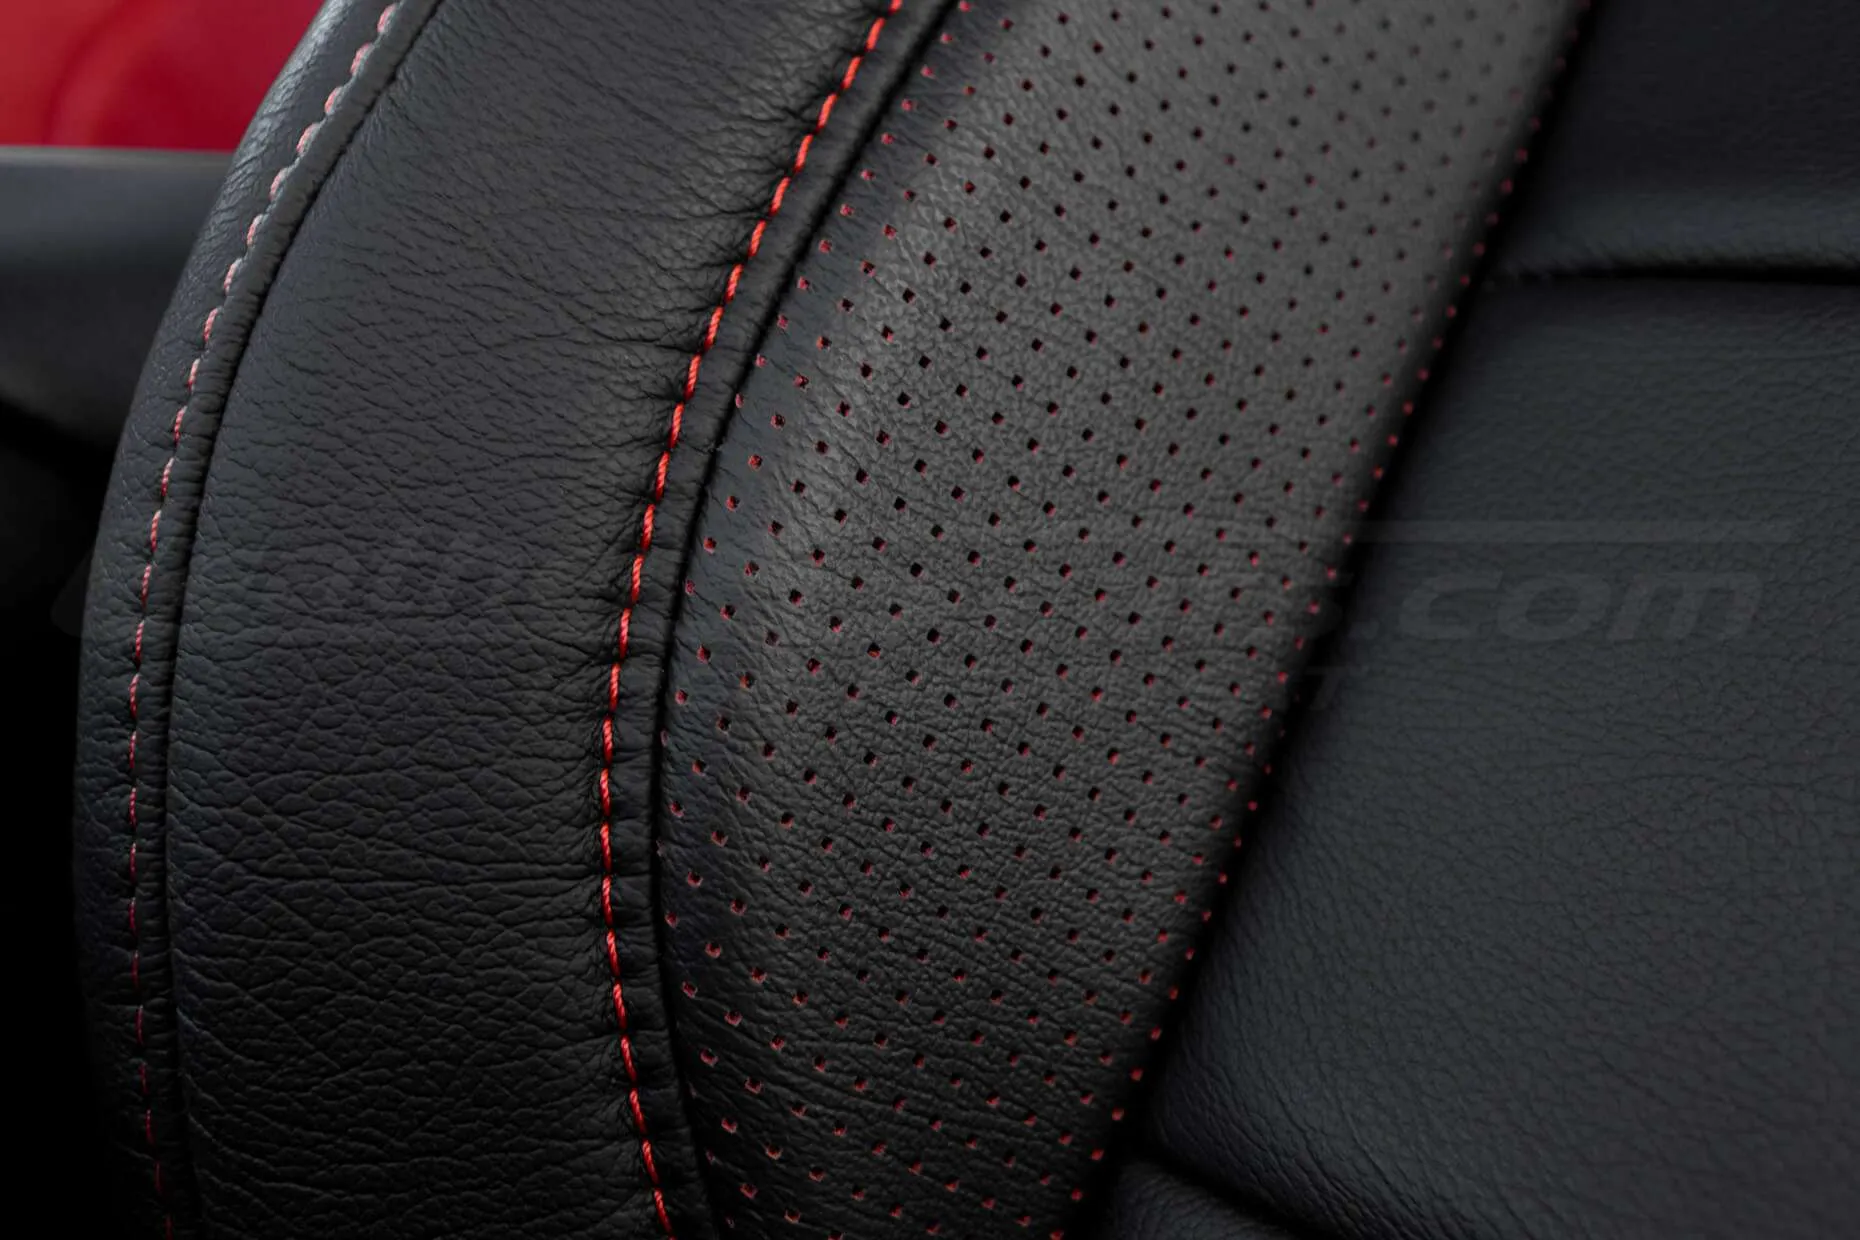 2015-2021 Ford Mustang Leather Upholstery Kit - Black & Bright Red - Installed - Wing Perforation and stitching close-up